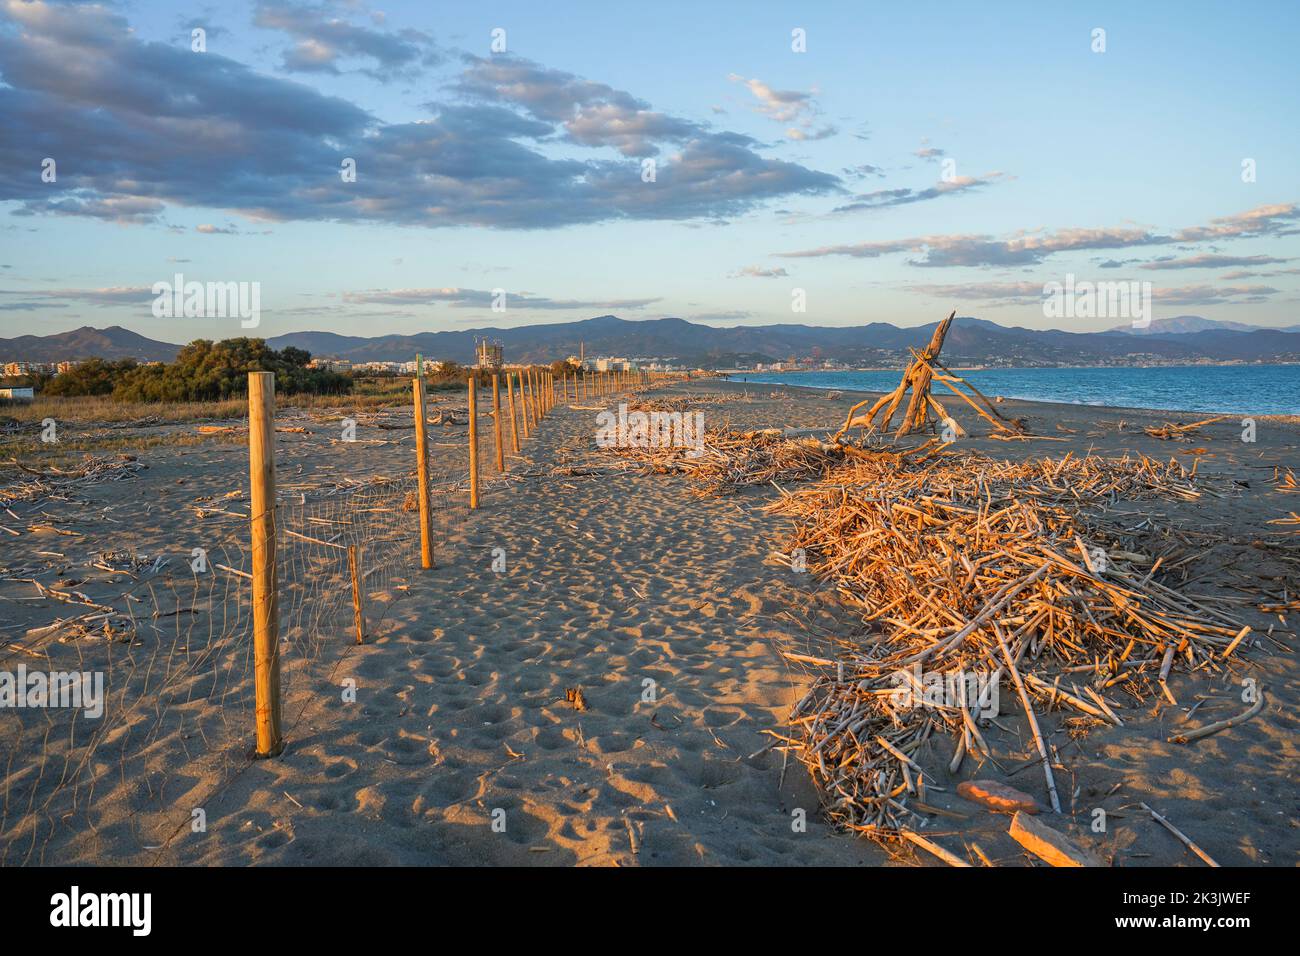 border fence of Guadalhorce natural reserve park, beach side near Malaga, Andalusia, Spain. Stock Photo